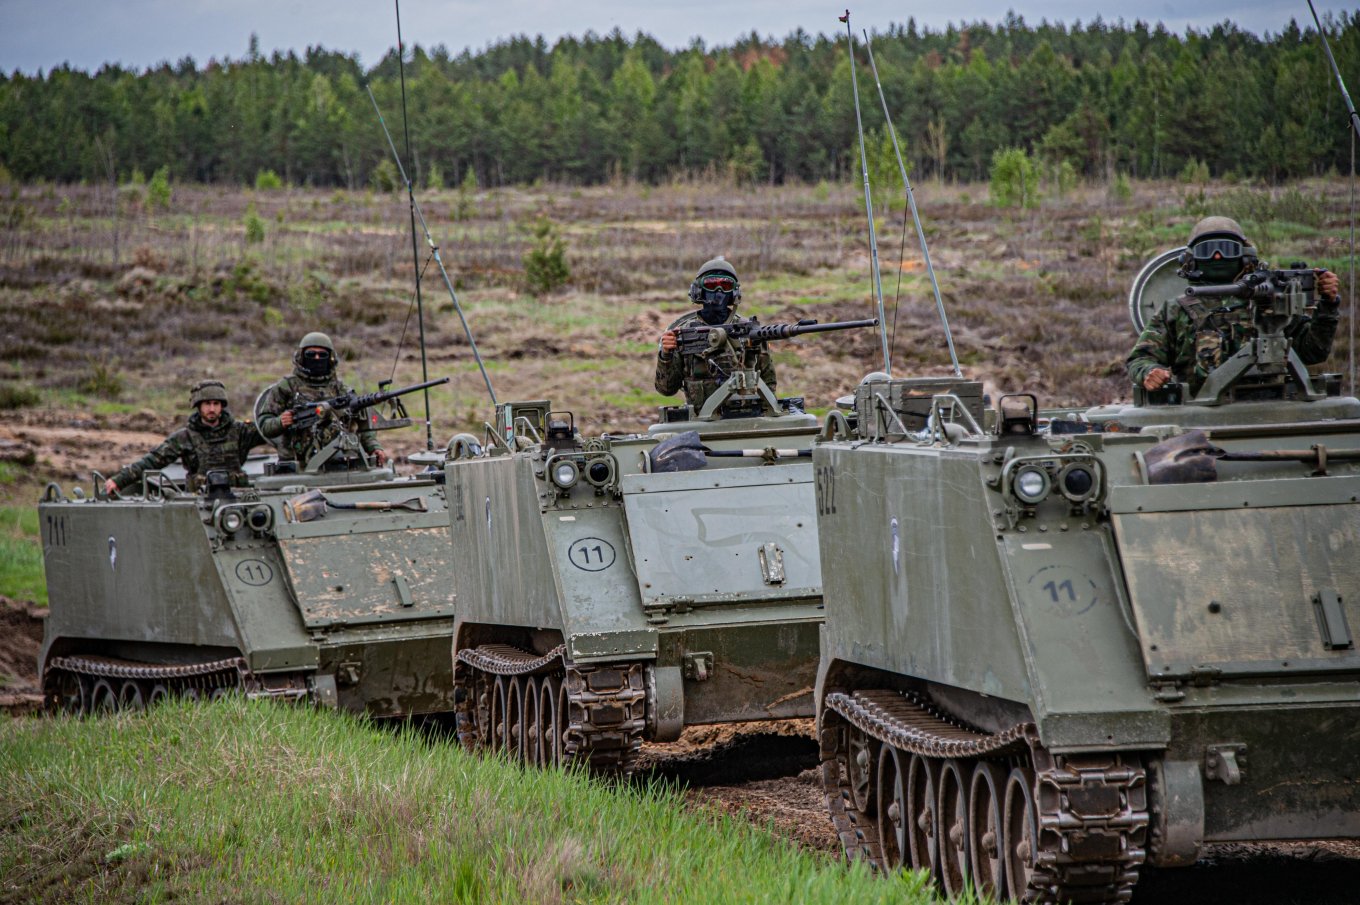 Spanish military on M113 armored personnel carriers during NATO exercises in Latvia, May 2022, Ukraine’s Troop Get More Western Armored Personnel Carriers, Defense Express